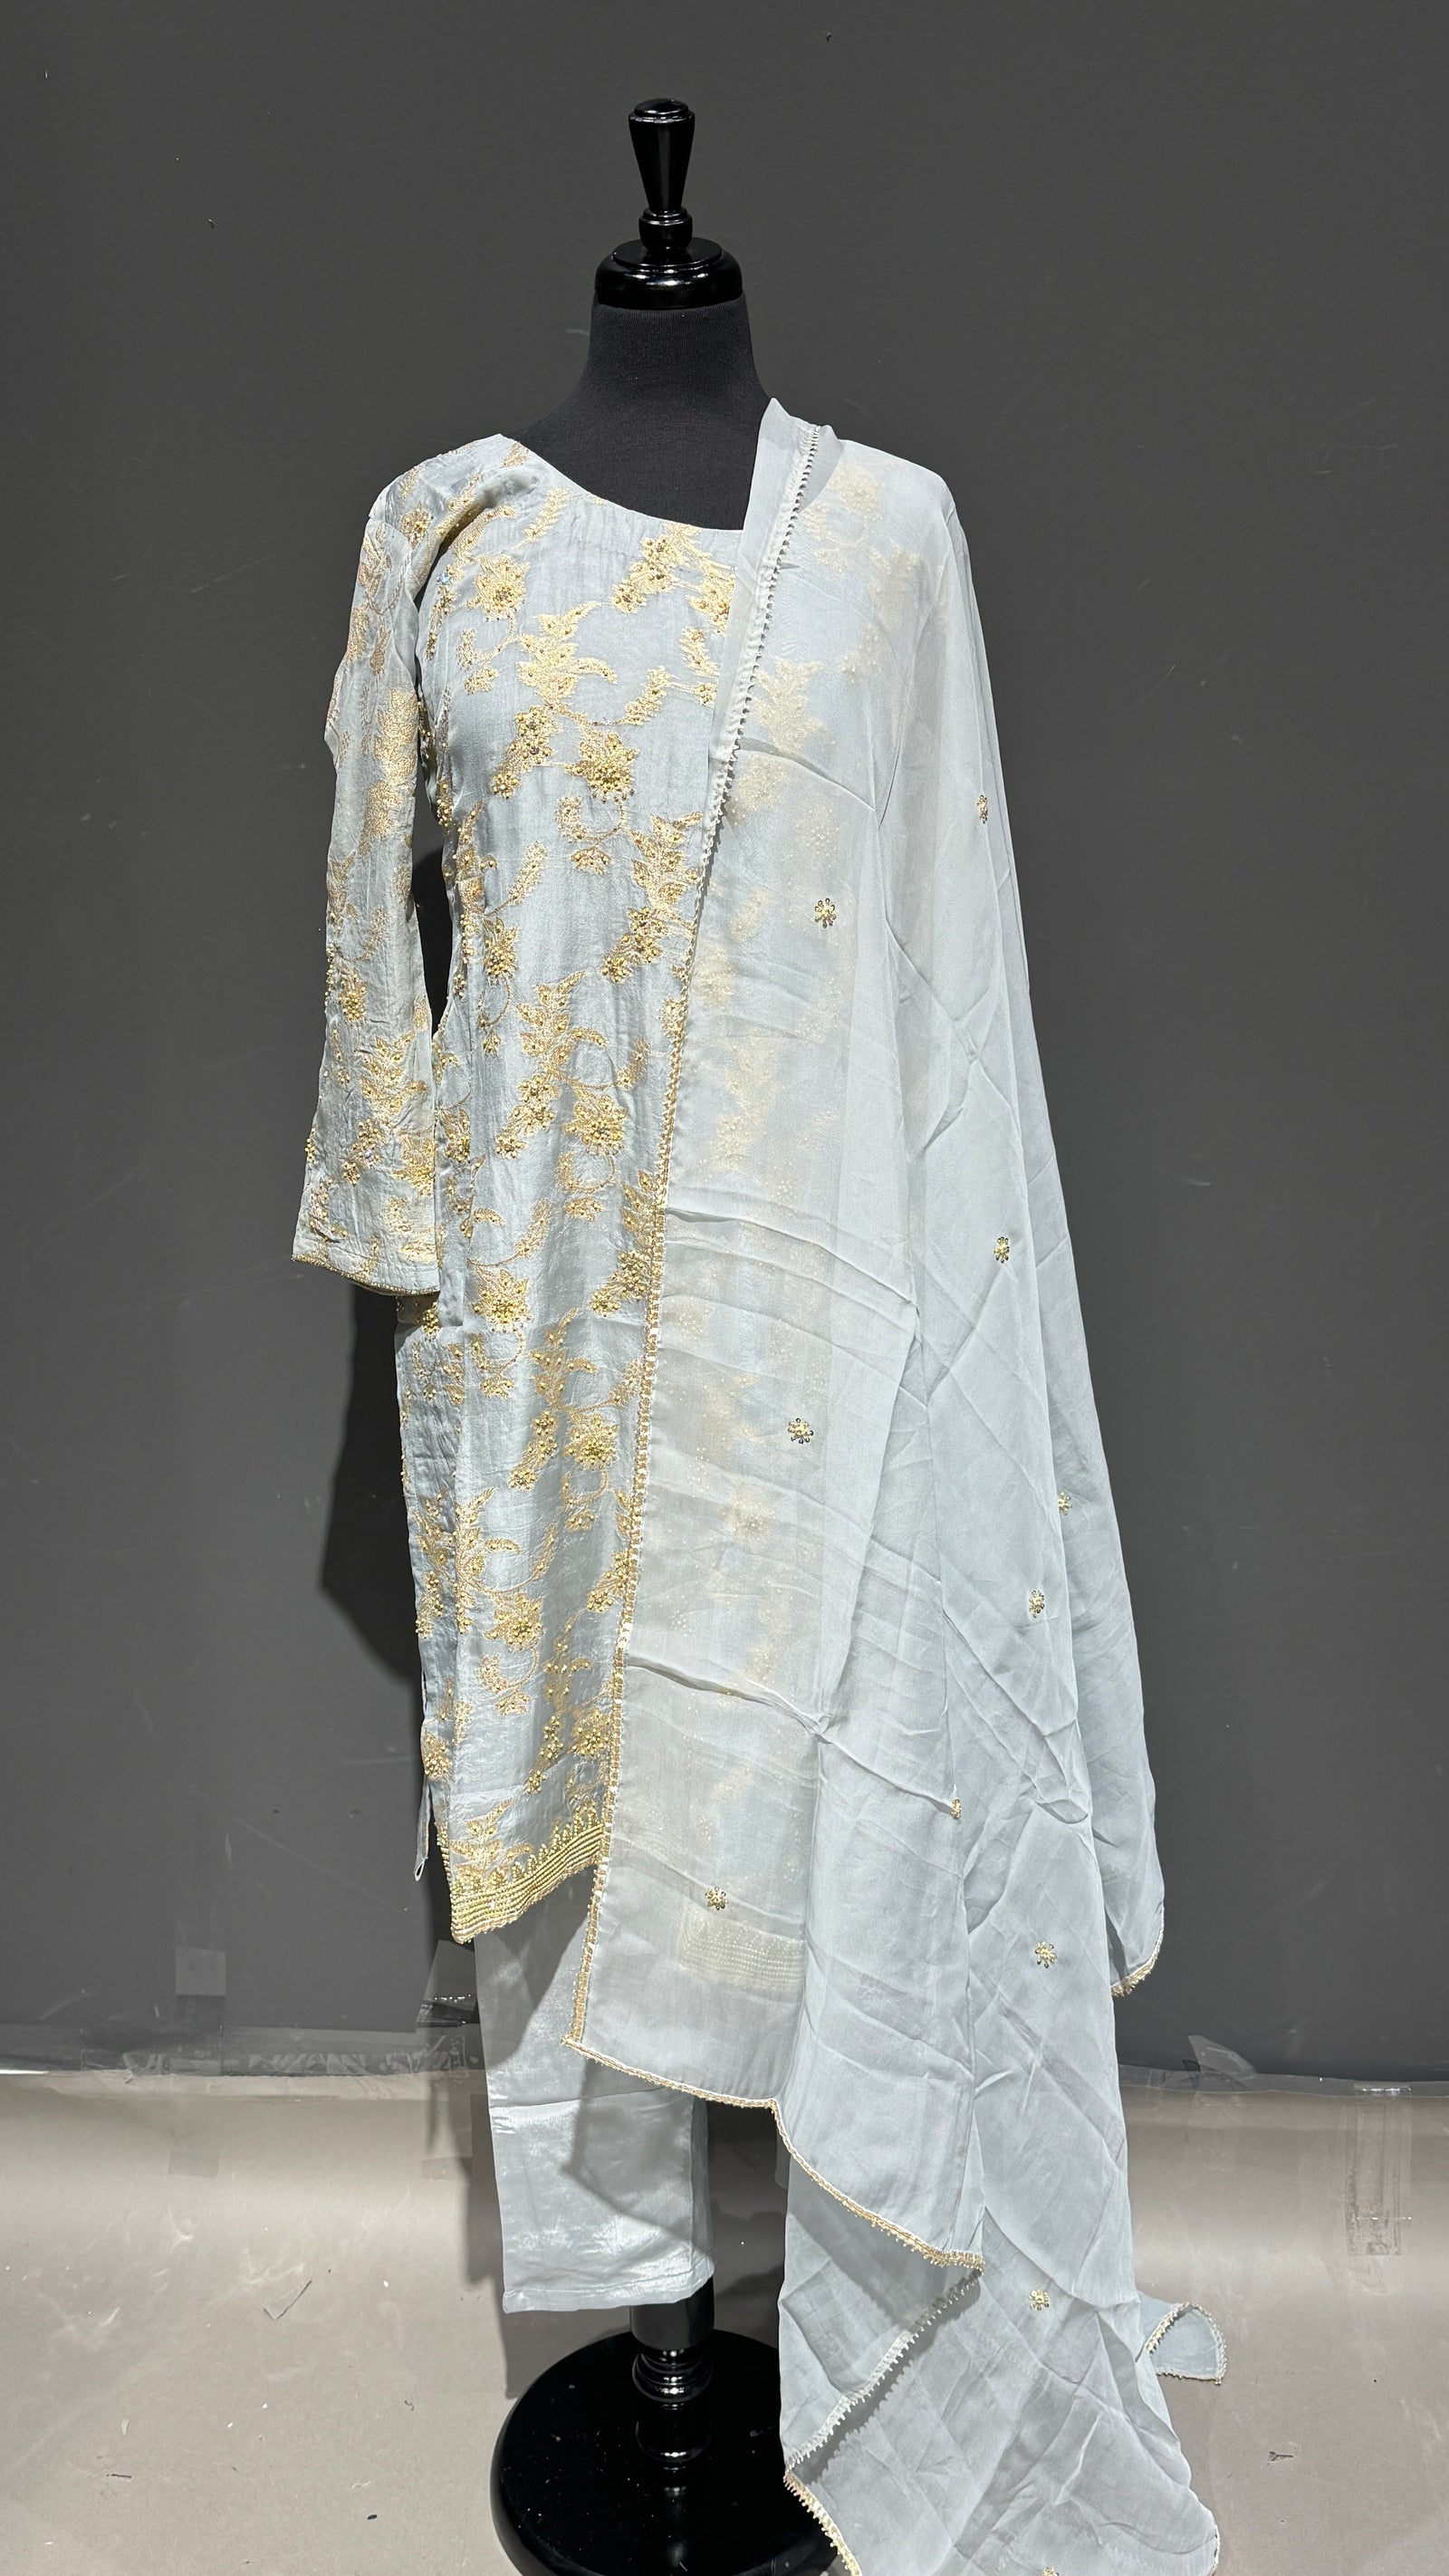 Exquisite Banarasi Suit with Handcrafted Embellishments